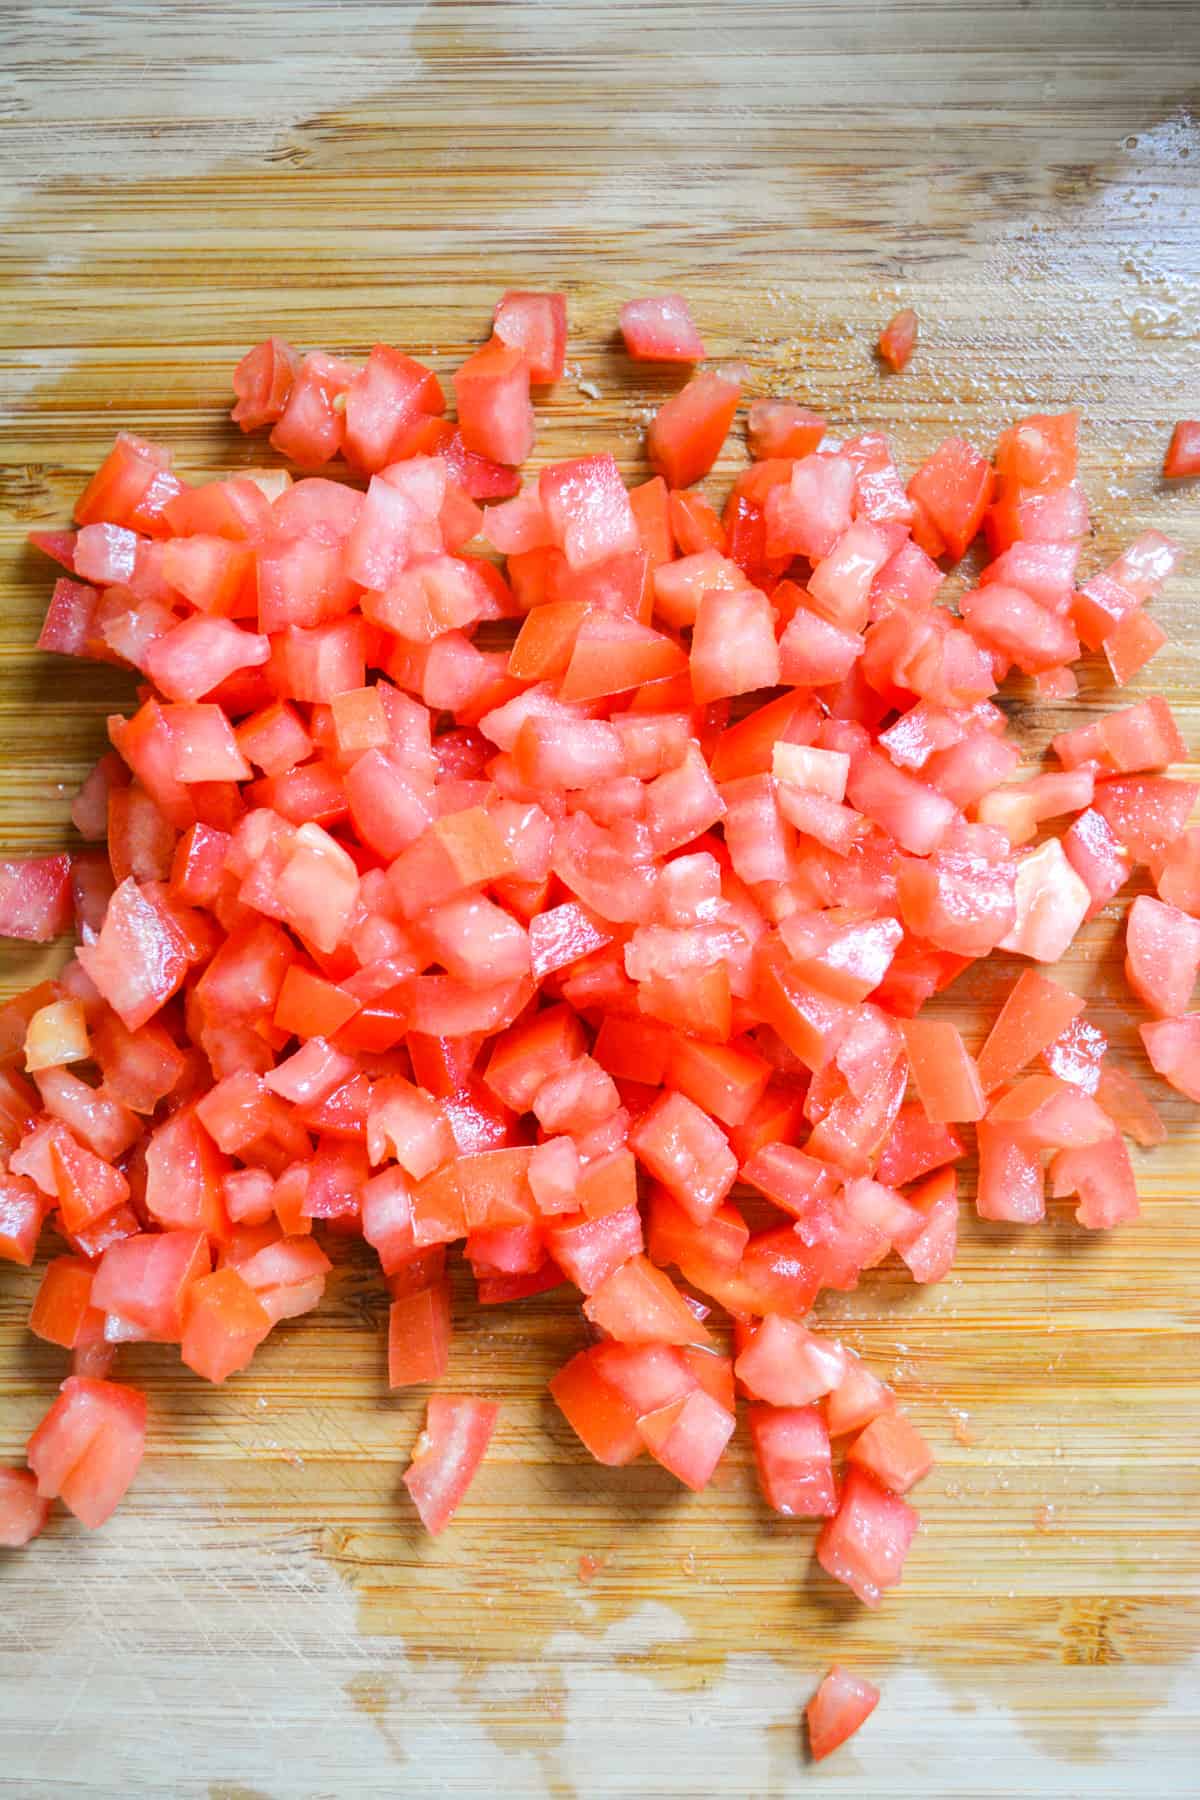 Diced Roma tomatoes on a wooden cutting board.